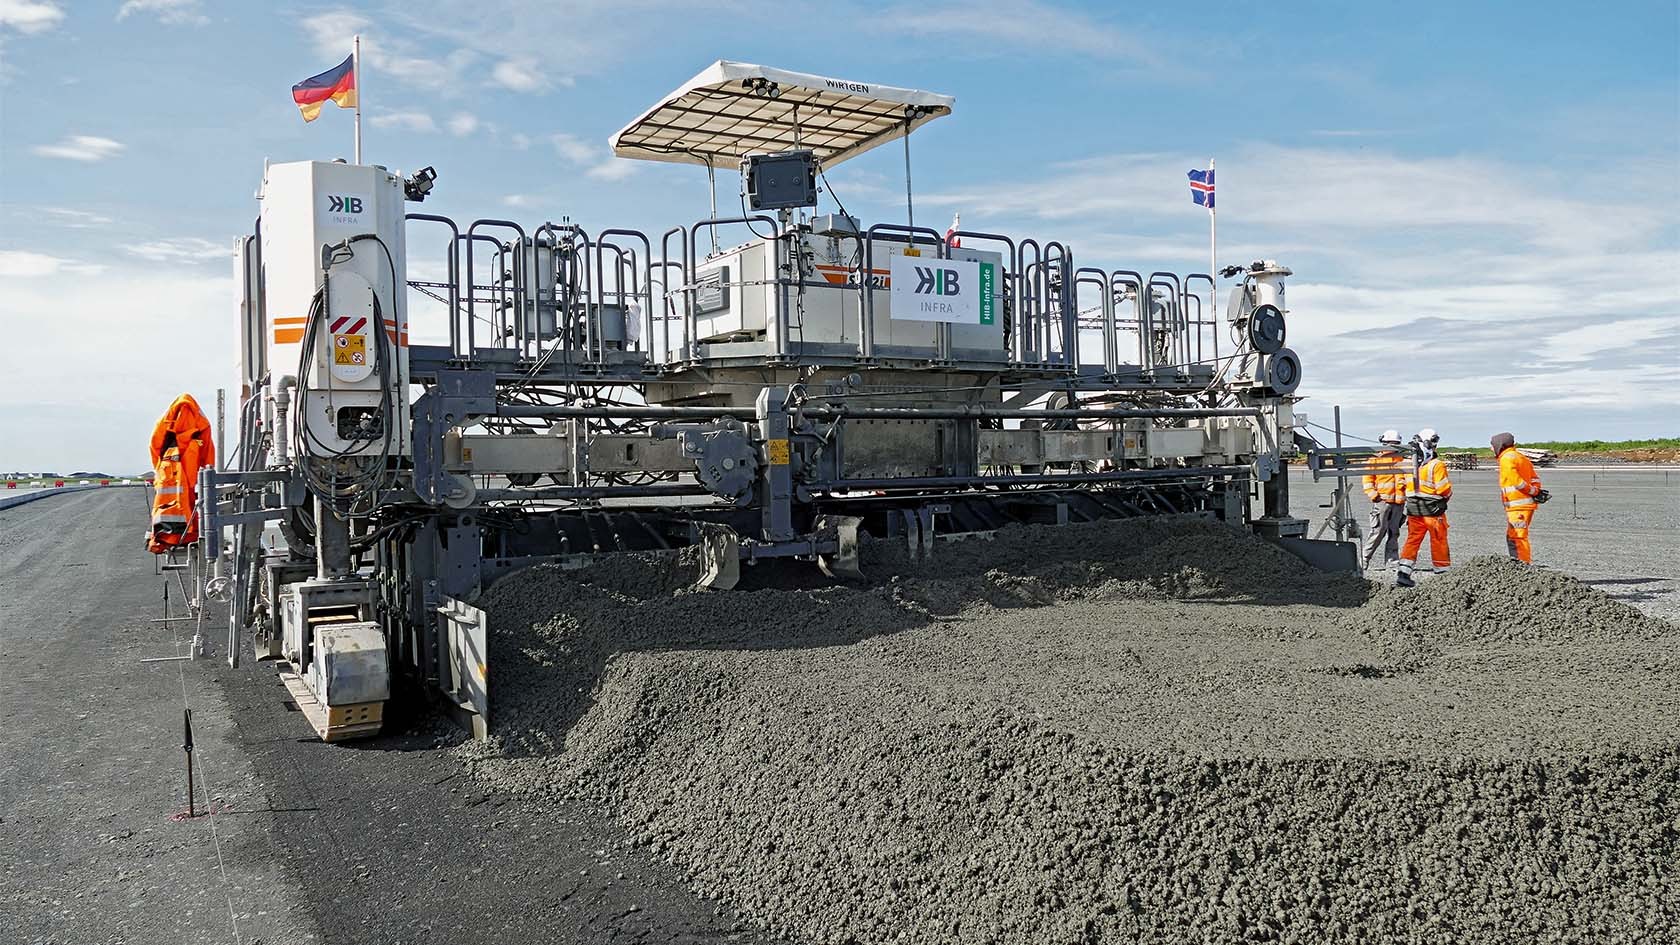 HIB Iceland Ehf deployed a Wirtgen SP 62i slipform paver for the extension of operational areas at Keflavik Air Base by concrete paving.